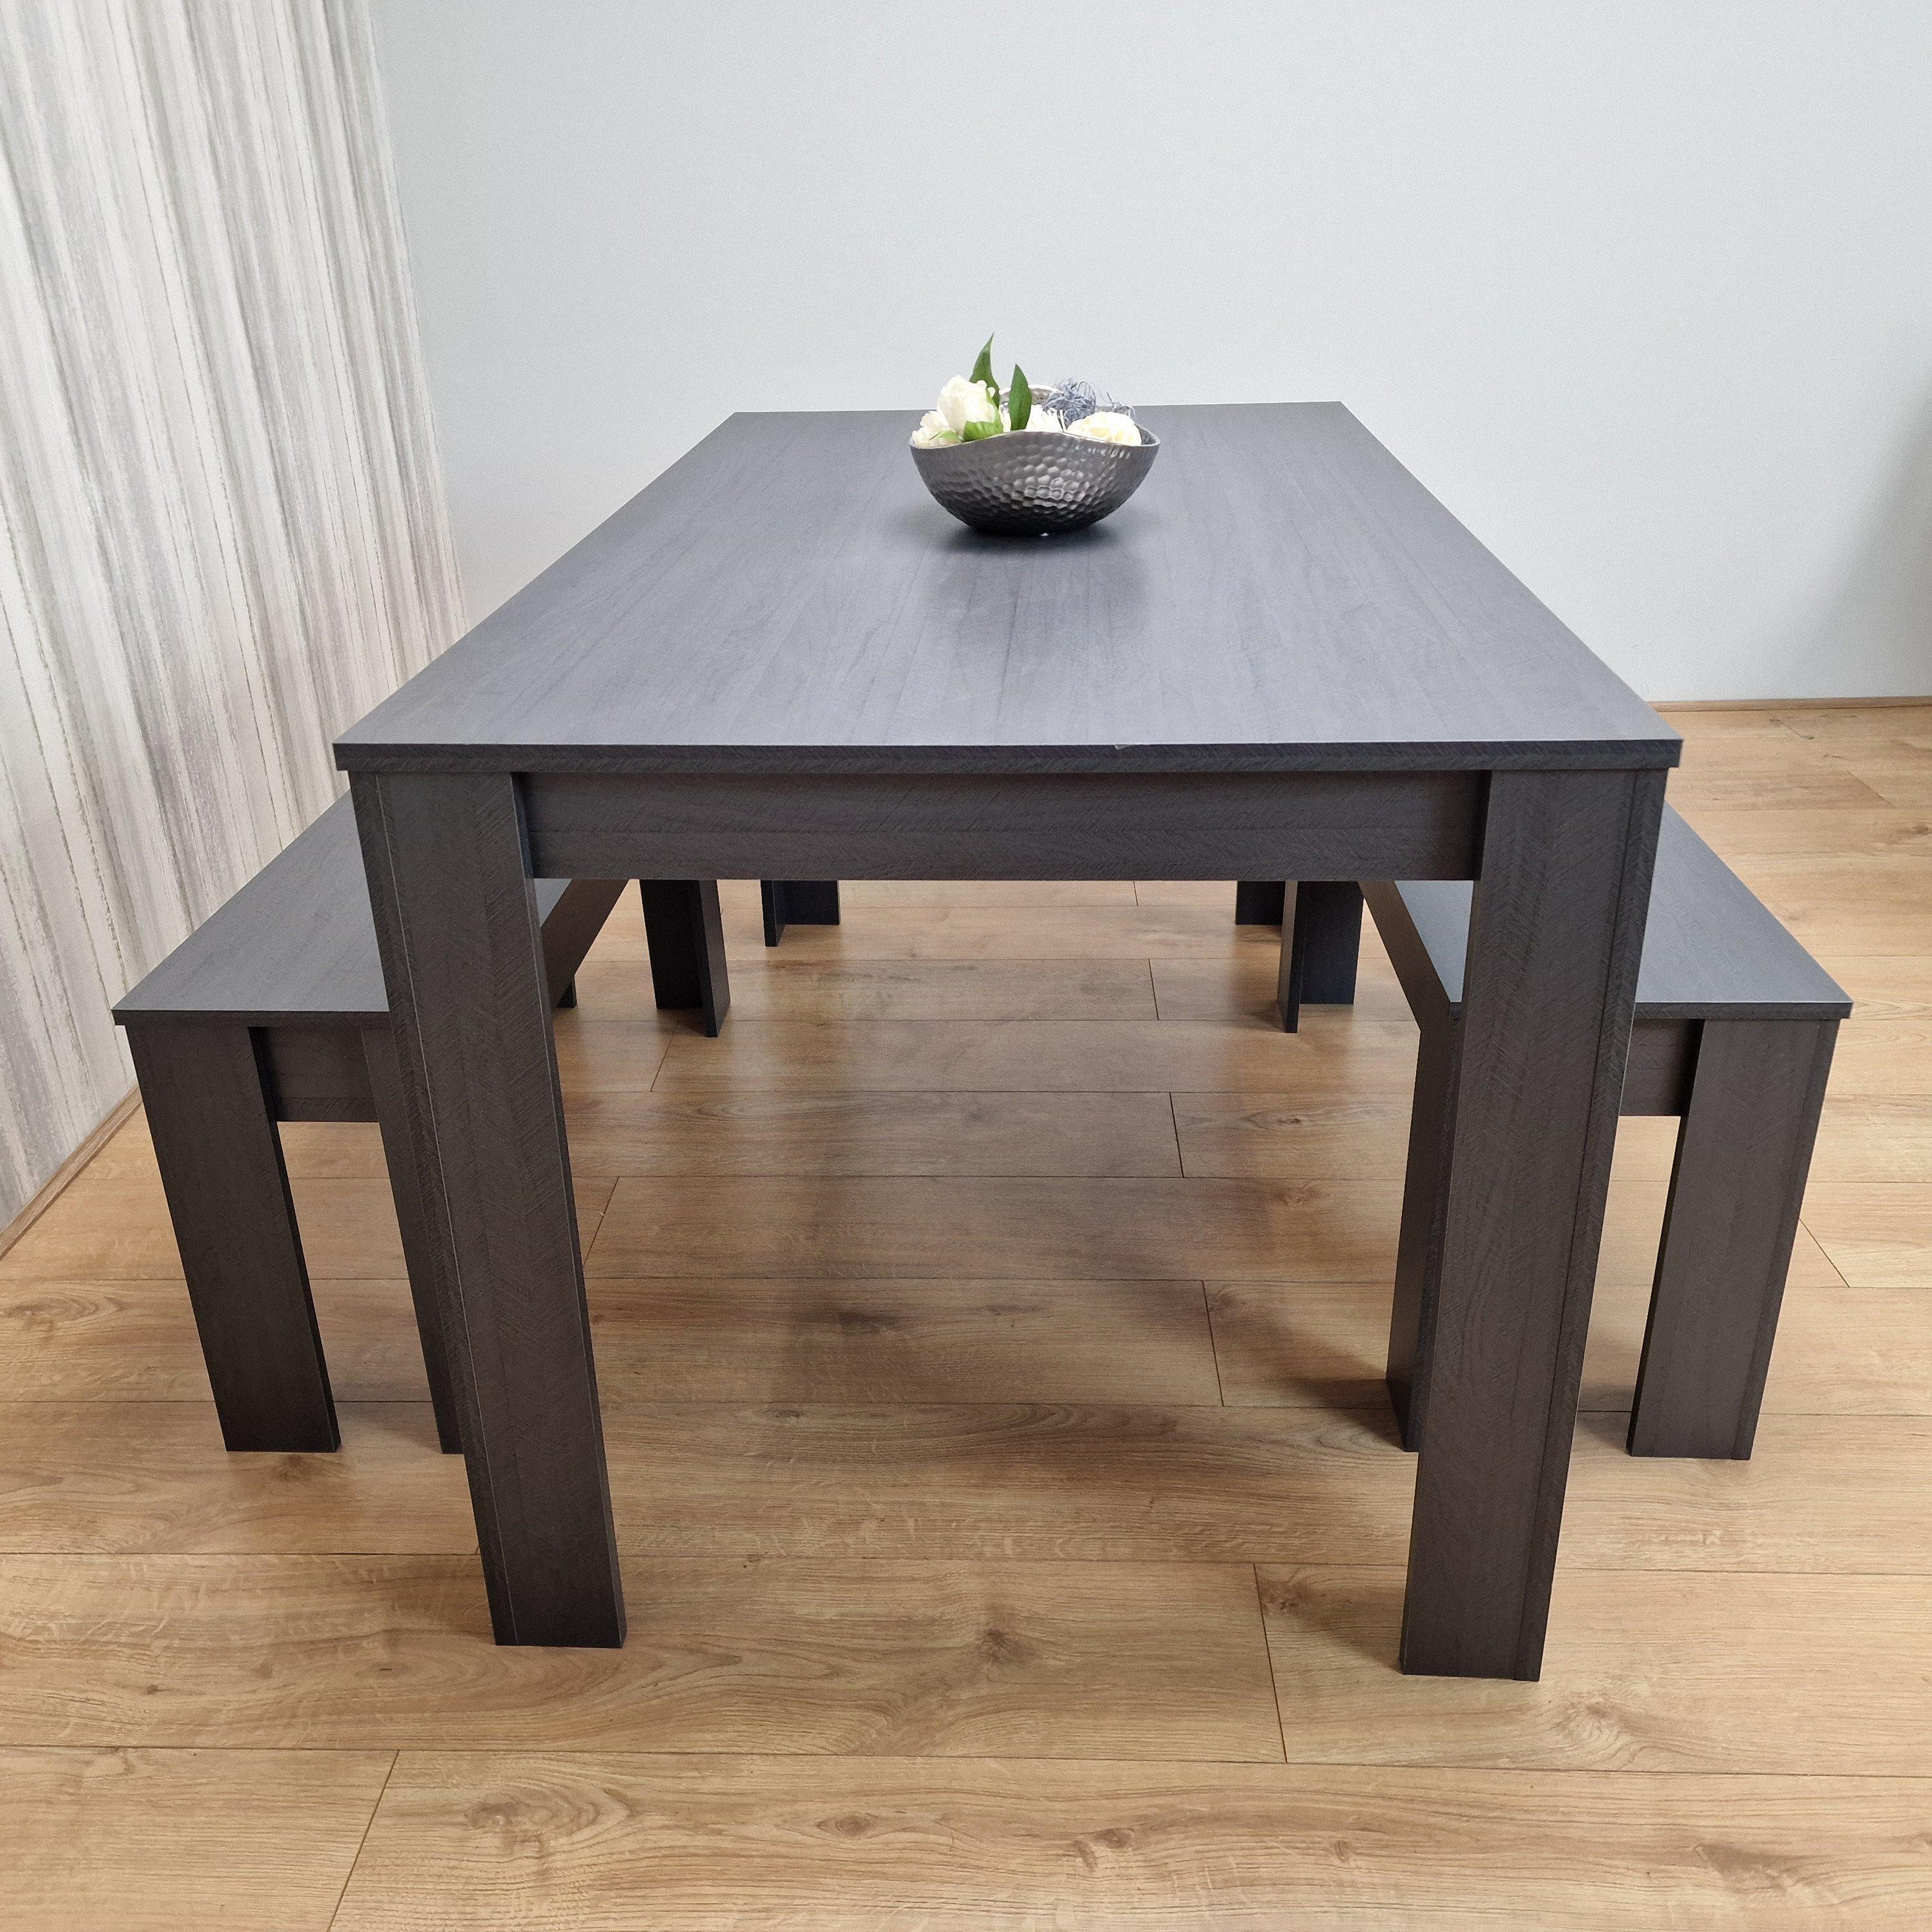 Dining Table Set Grey Dining Table(140x80x75cm) With 2 Benches Kitchen Dining Table Set Dining Room Table for Four - image 1